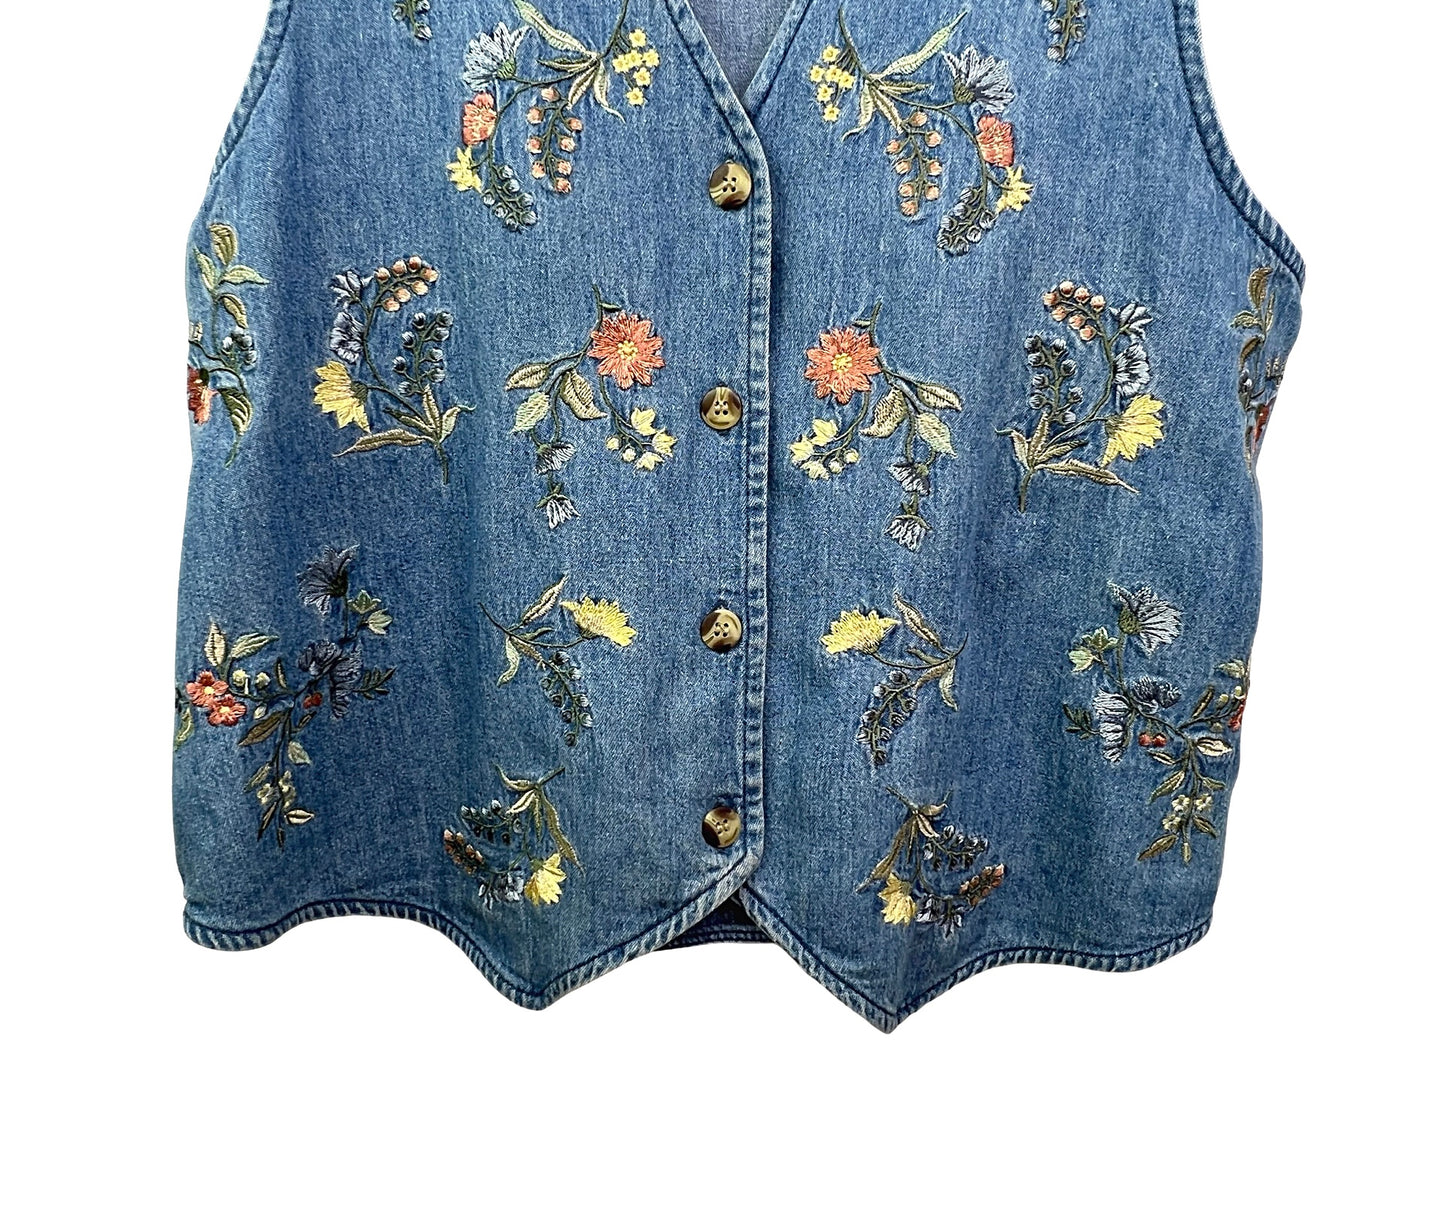 90’s Embroidered Flowers Denim Vest Wms Sz Small